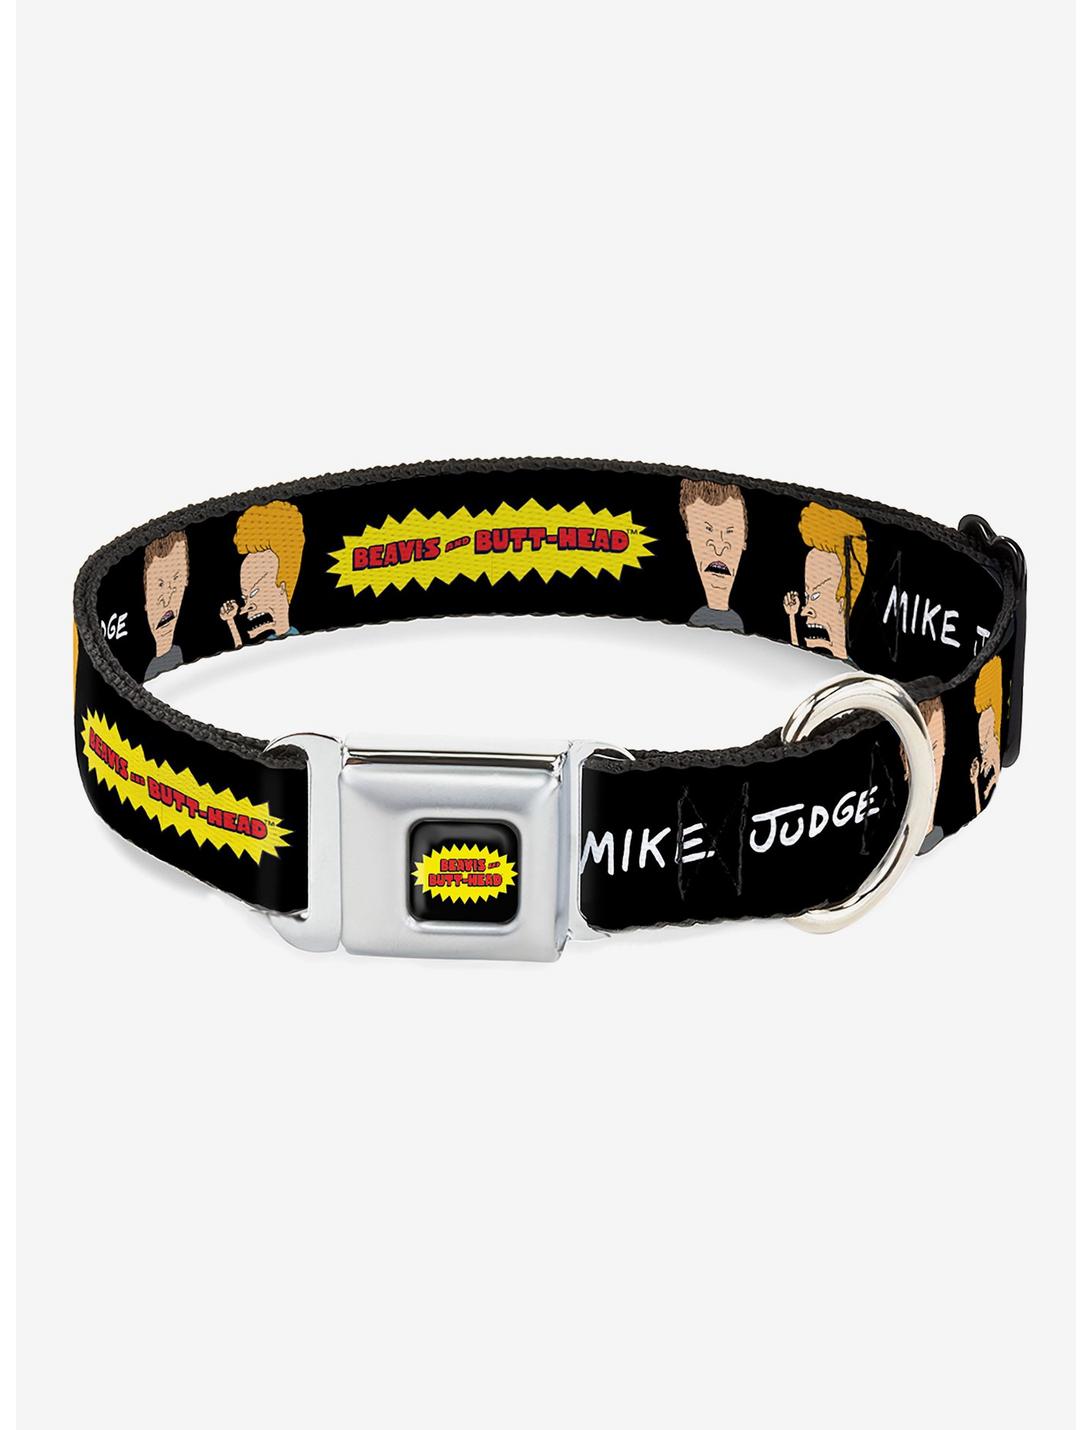 Beavis and Butt-Head Title Logo and Pose Seatbelt Buckle Dog Collar, BLACK, hi-res